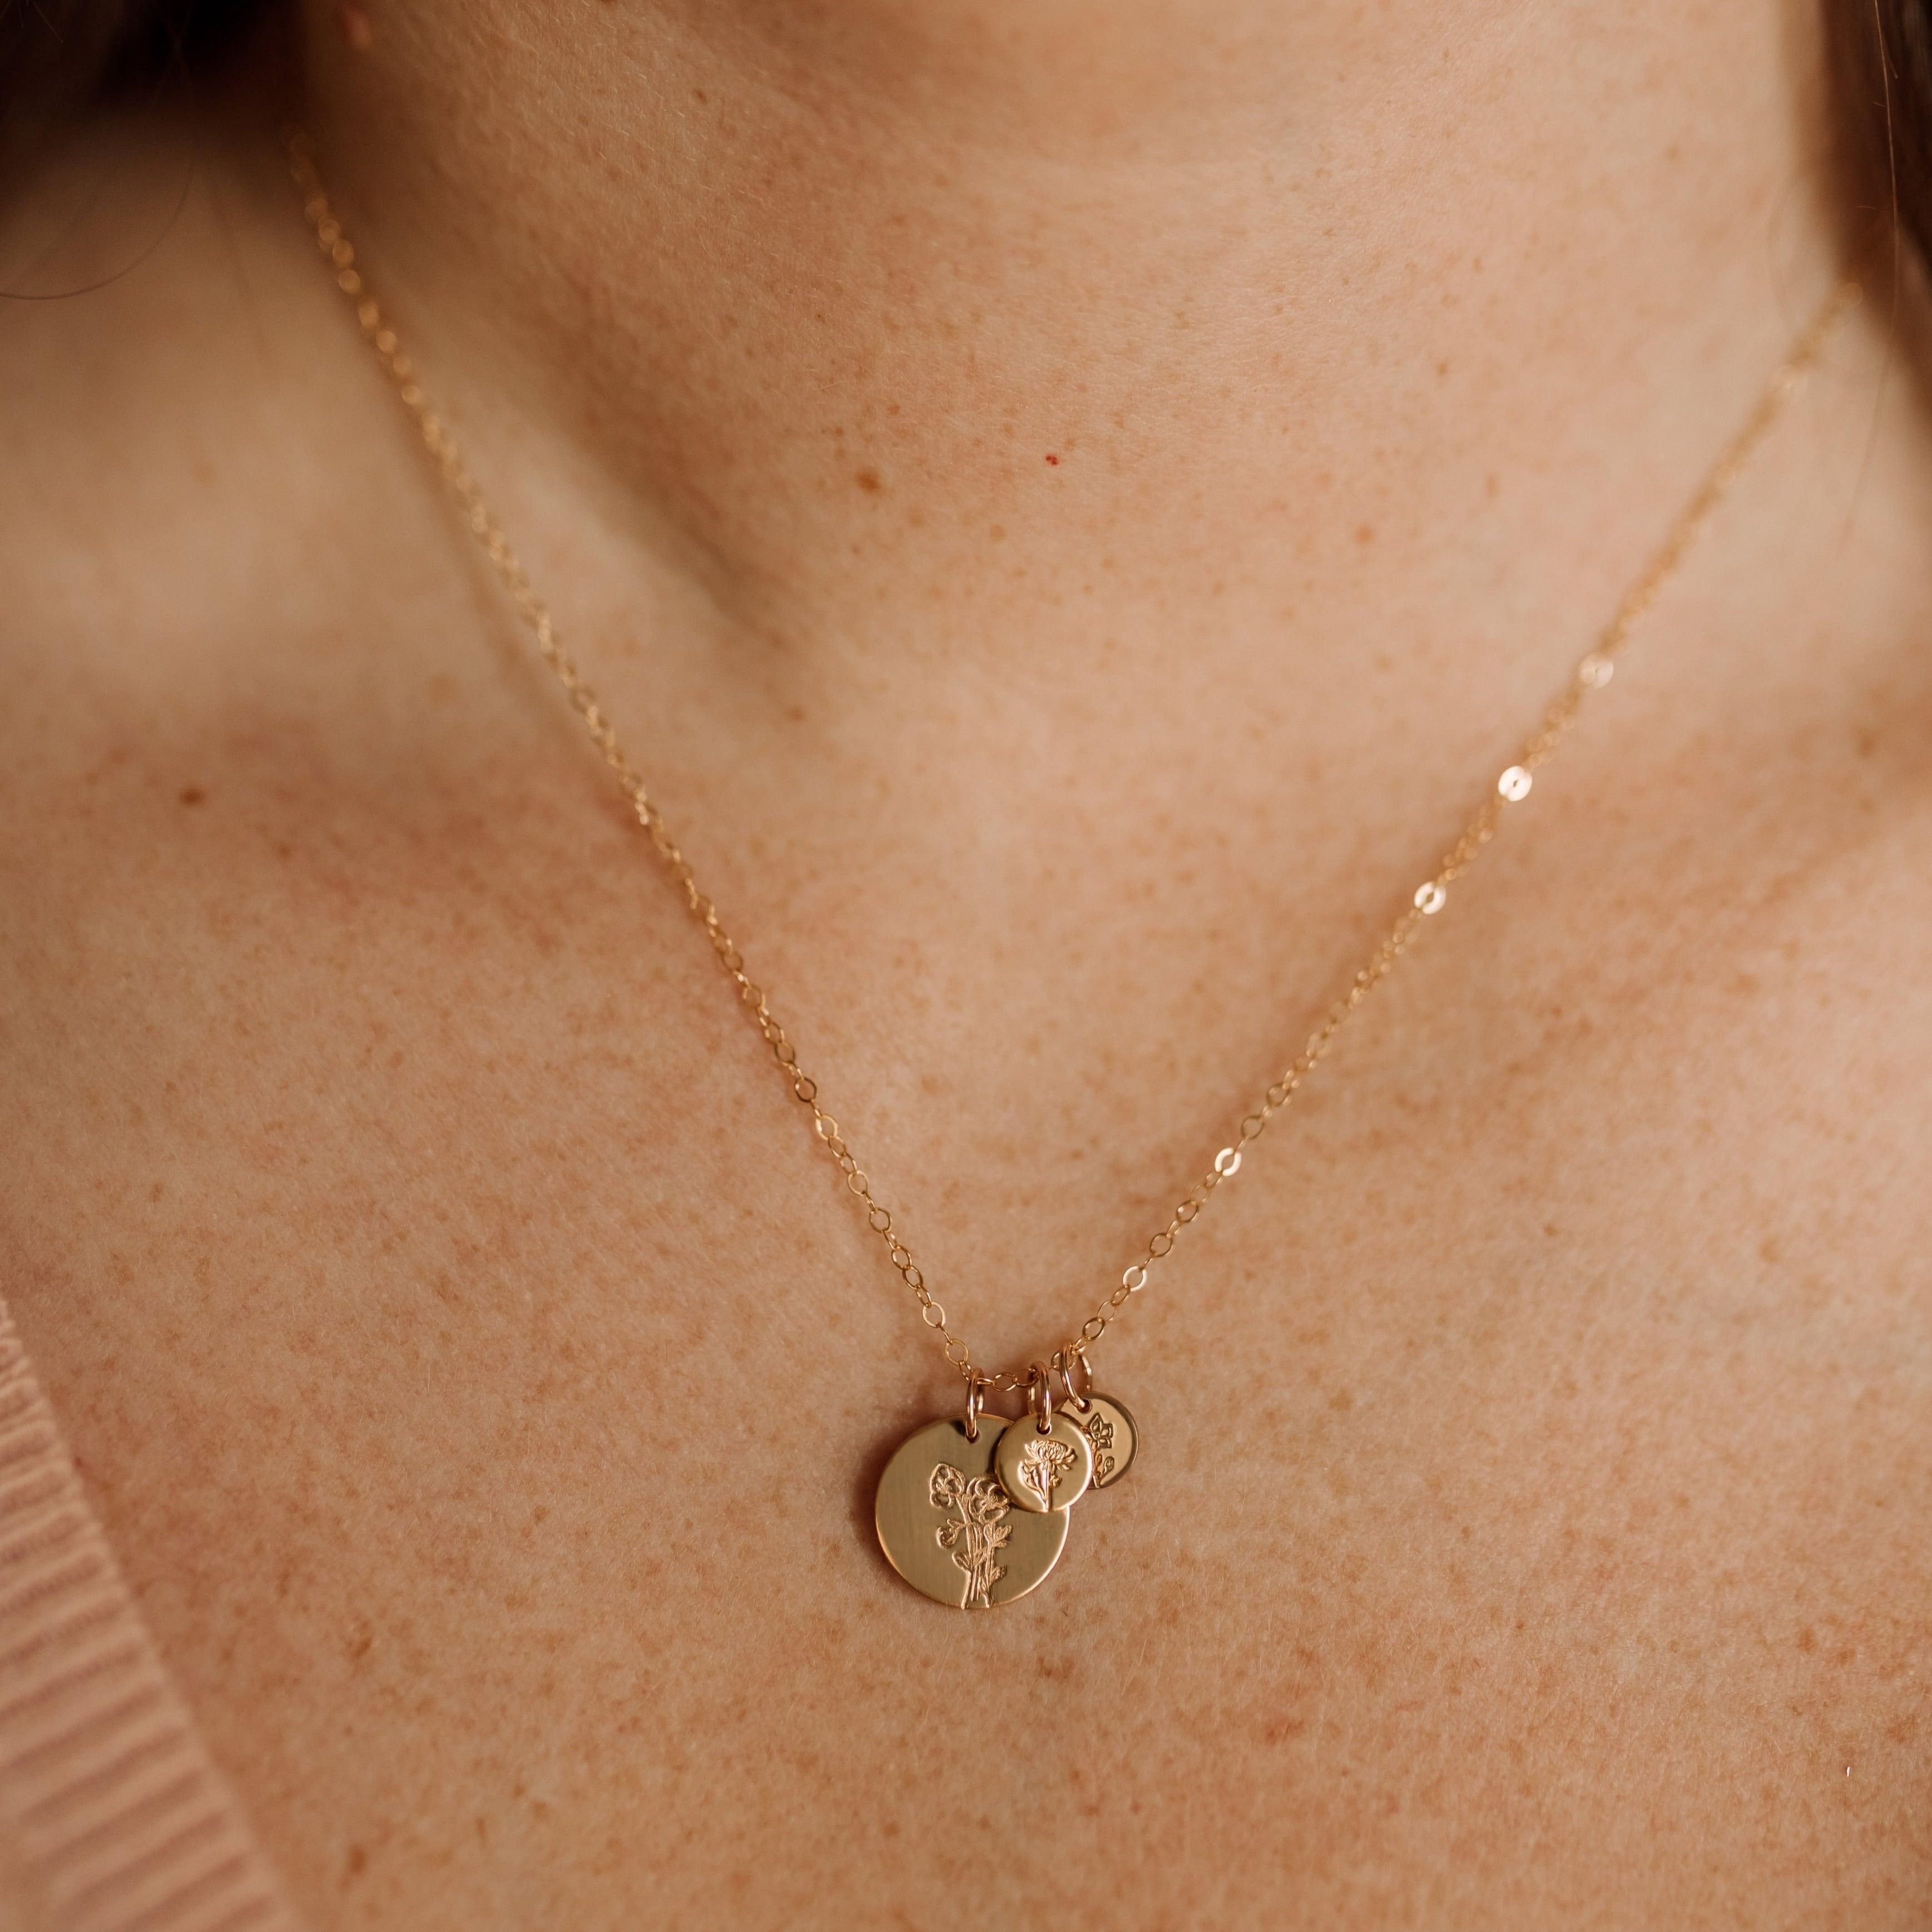 Mama's Garden Necklace - Nolia Jewelry - Meaningful + Sustainably Handcrafted Jewelry